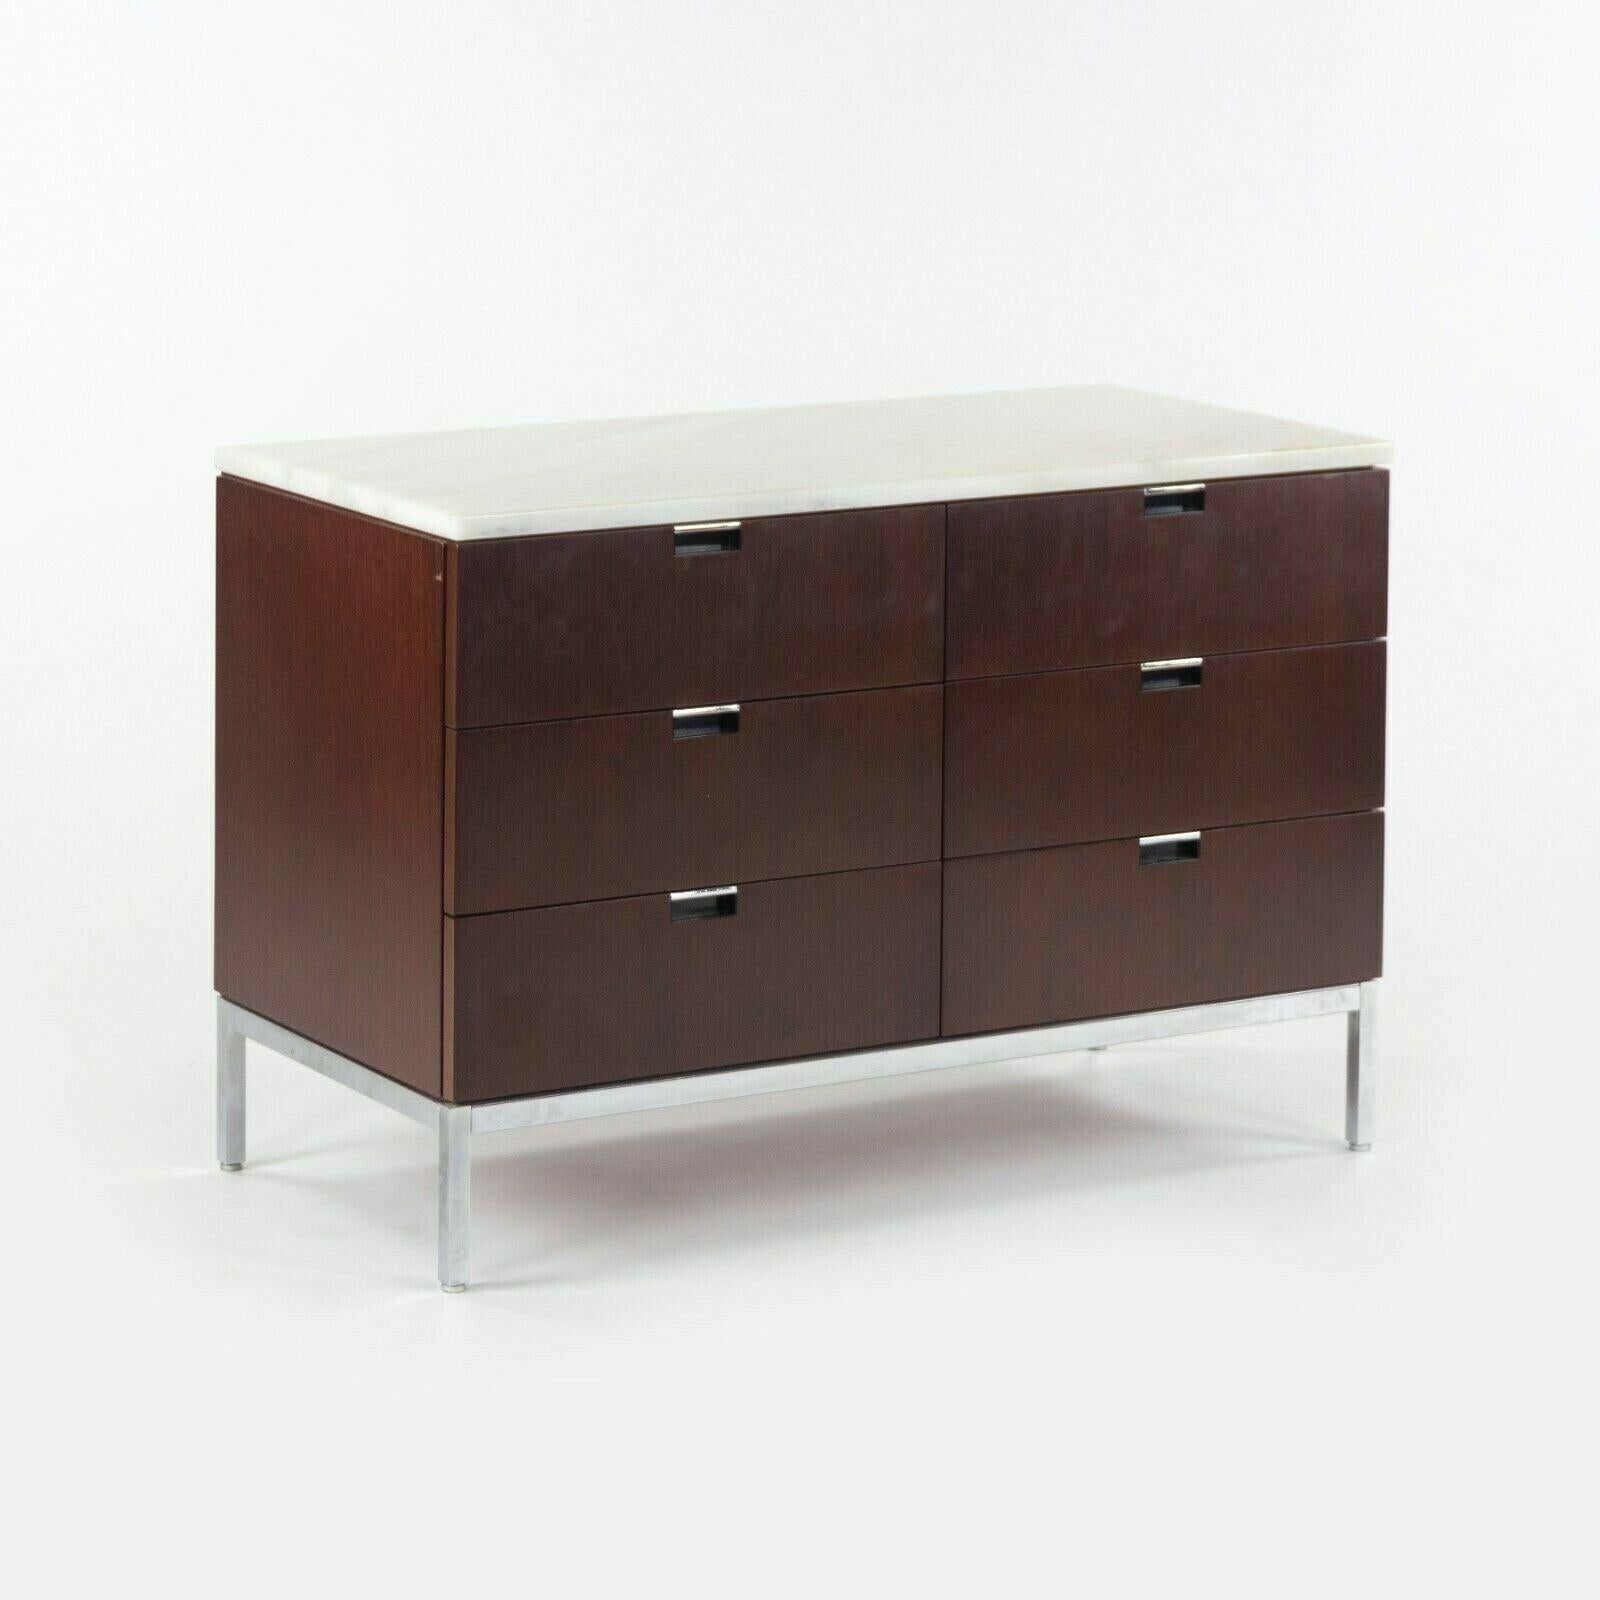 Listed for sale is a gorgeous original 1970s Florence Knoll 6-drawer credenza/dresser, produced by Knoll International. This example has a dark mahogany finish with original marble top. The finish is original and in very nice condition. The marks on